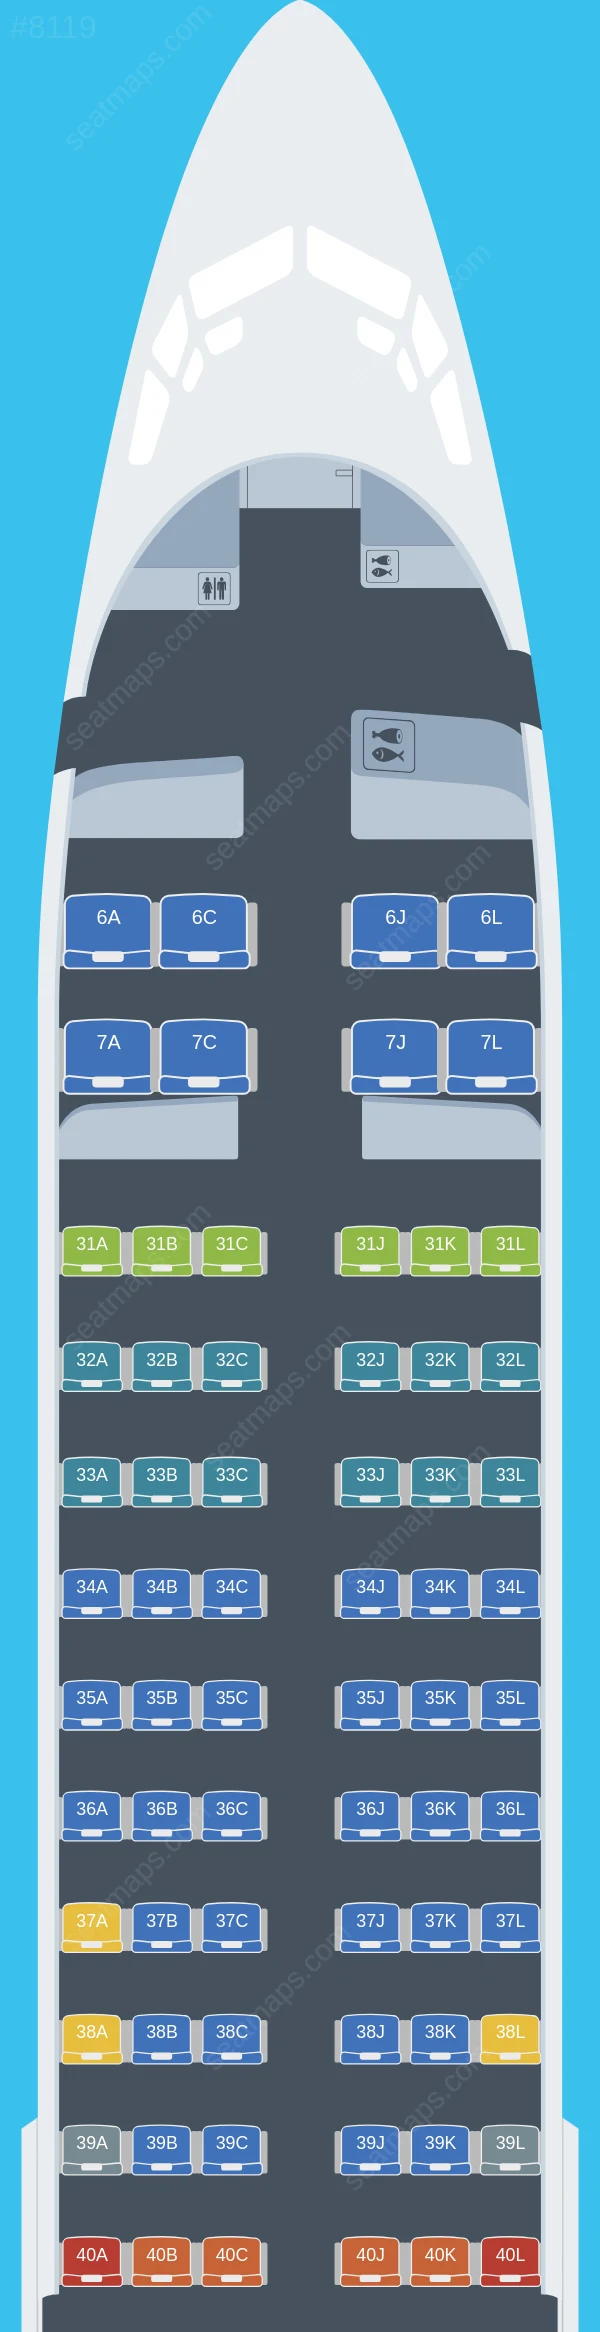 China Eastern Boeing 737-800 V.2 seatmap preview